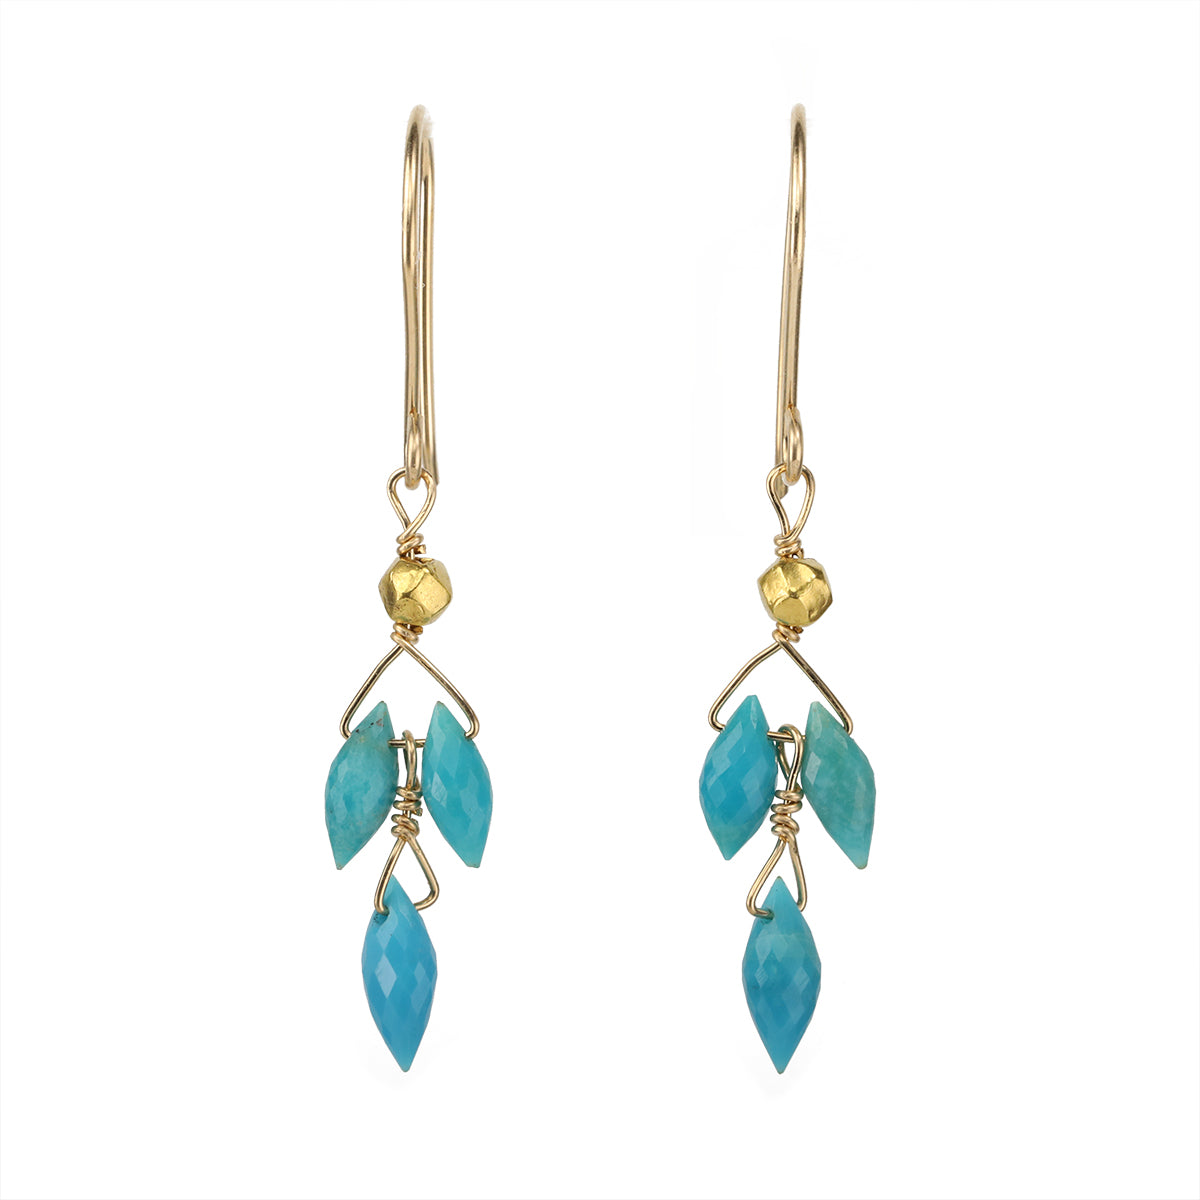 Gold Vermeil Earrings with Triple Marquise Turquoise Drops